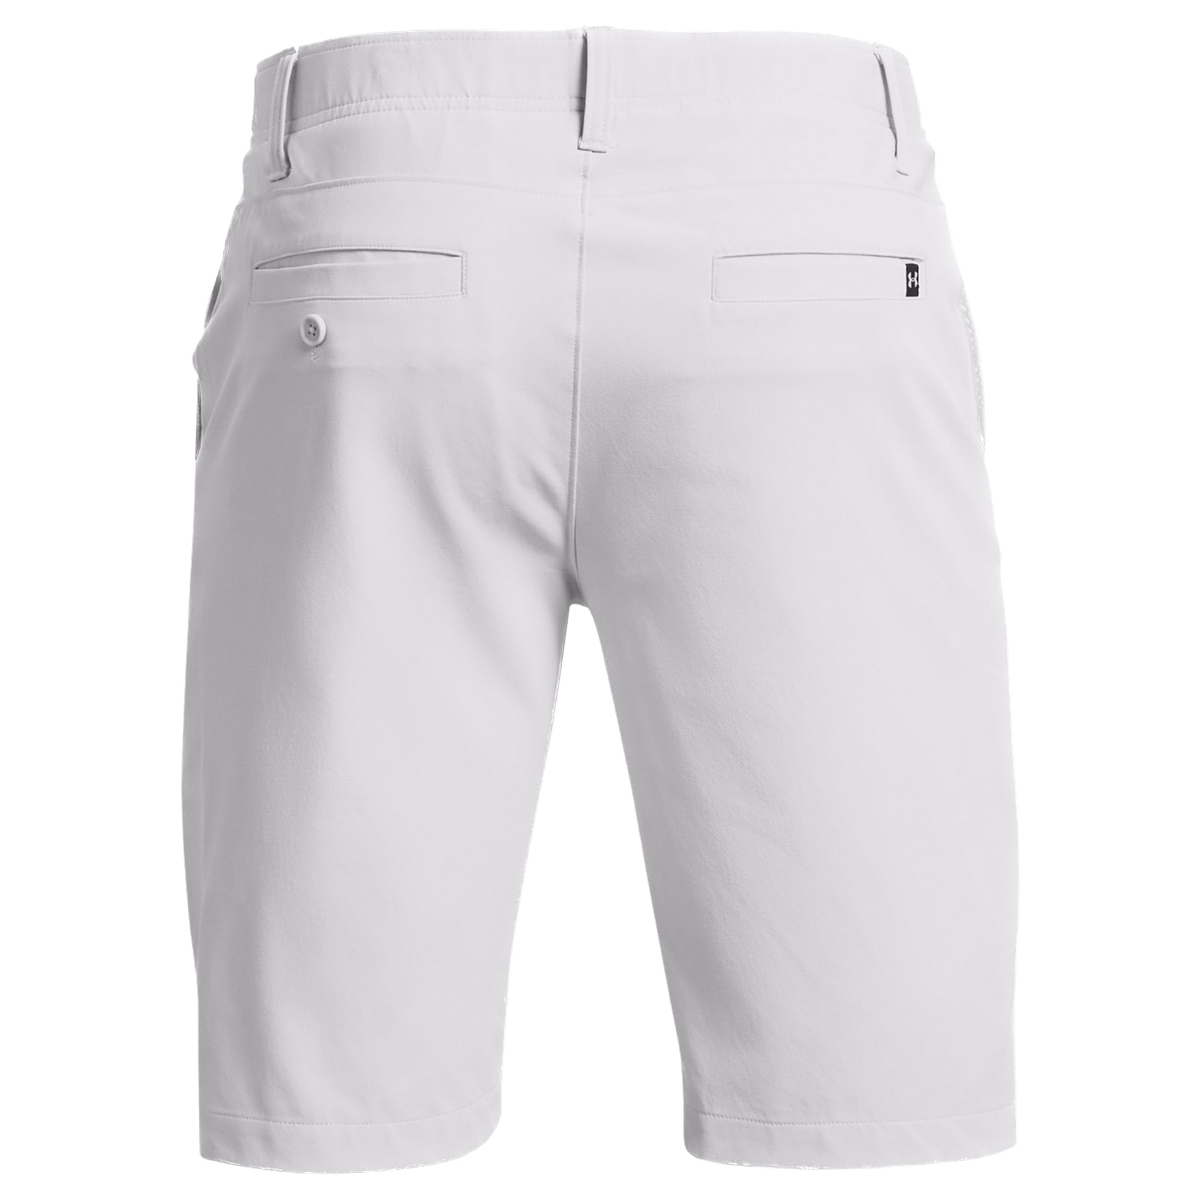 Under Armour Drive Taper Shorts Halo Gray